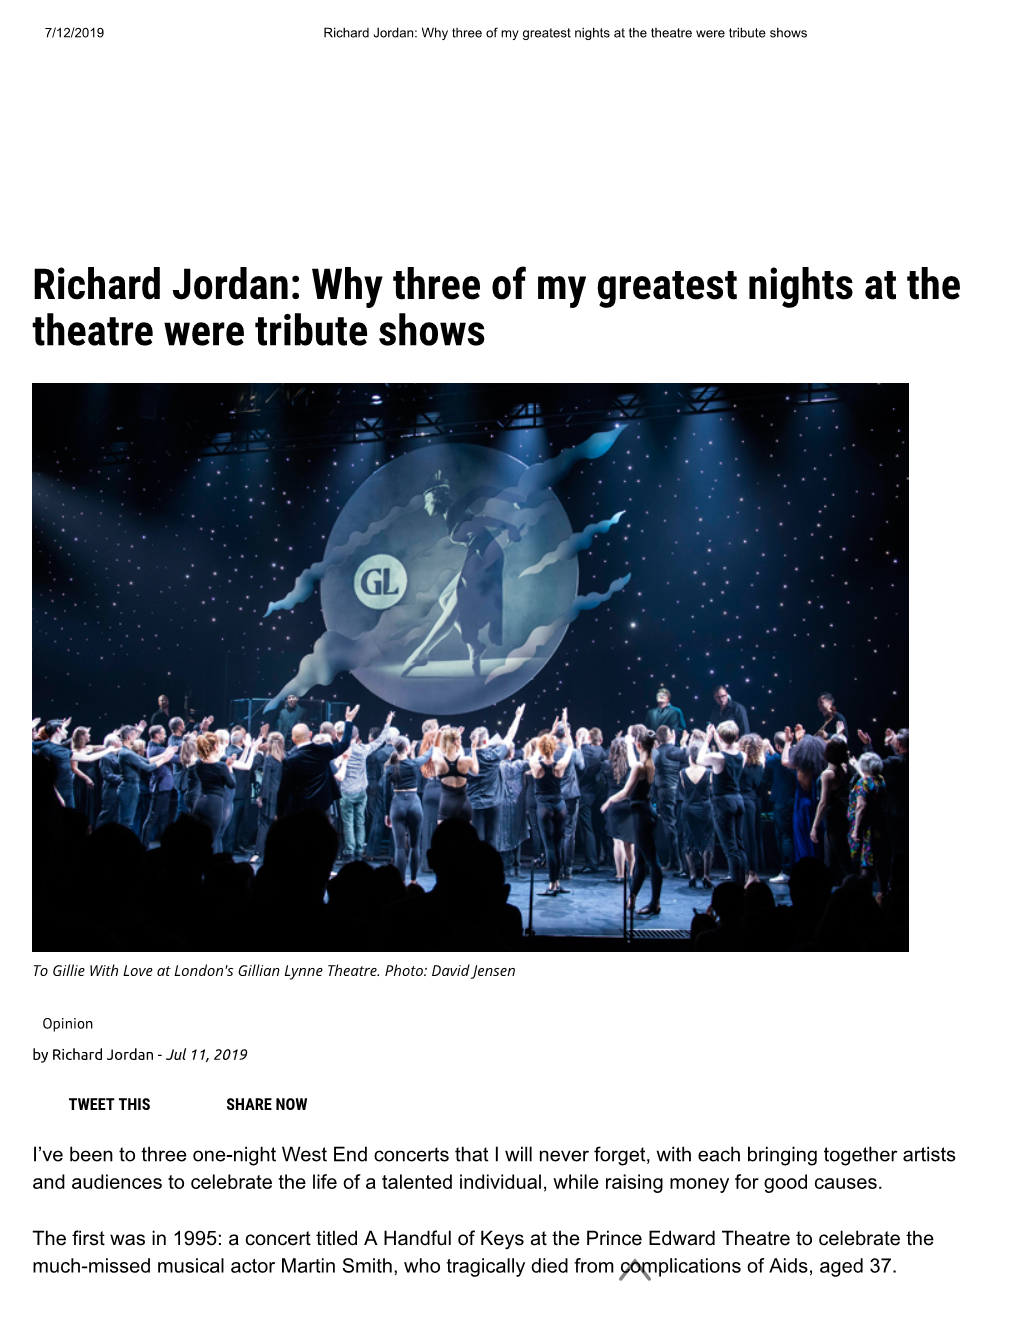 Richard Jordan: Why Three of My Greatest Nights at the Theatre Were Tribute Shows